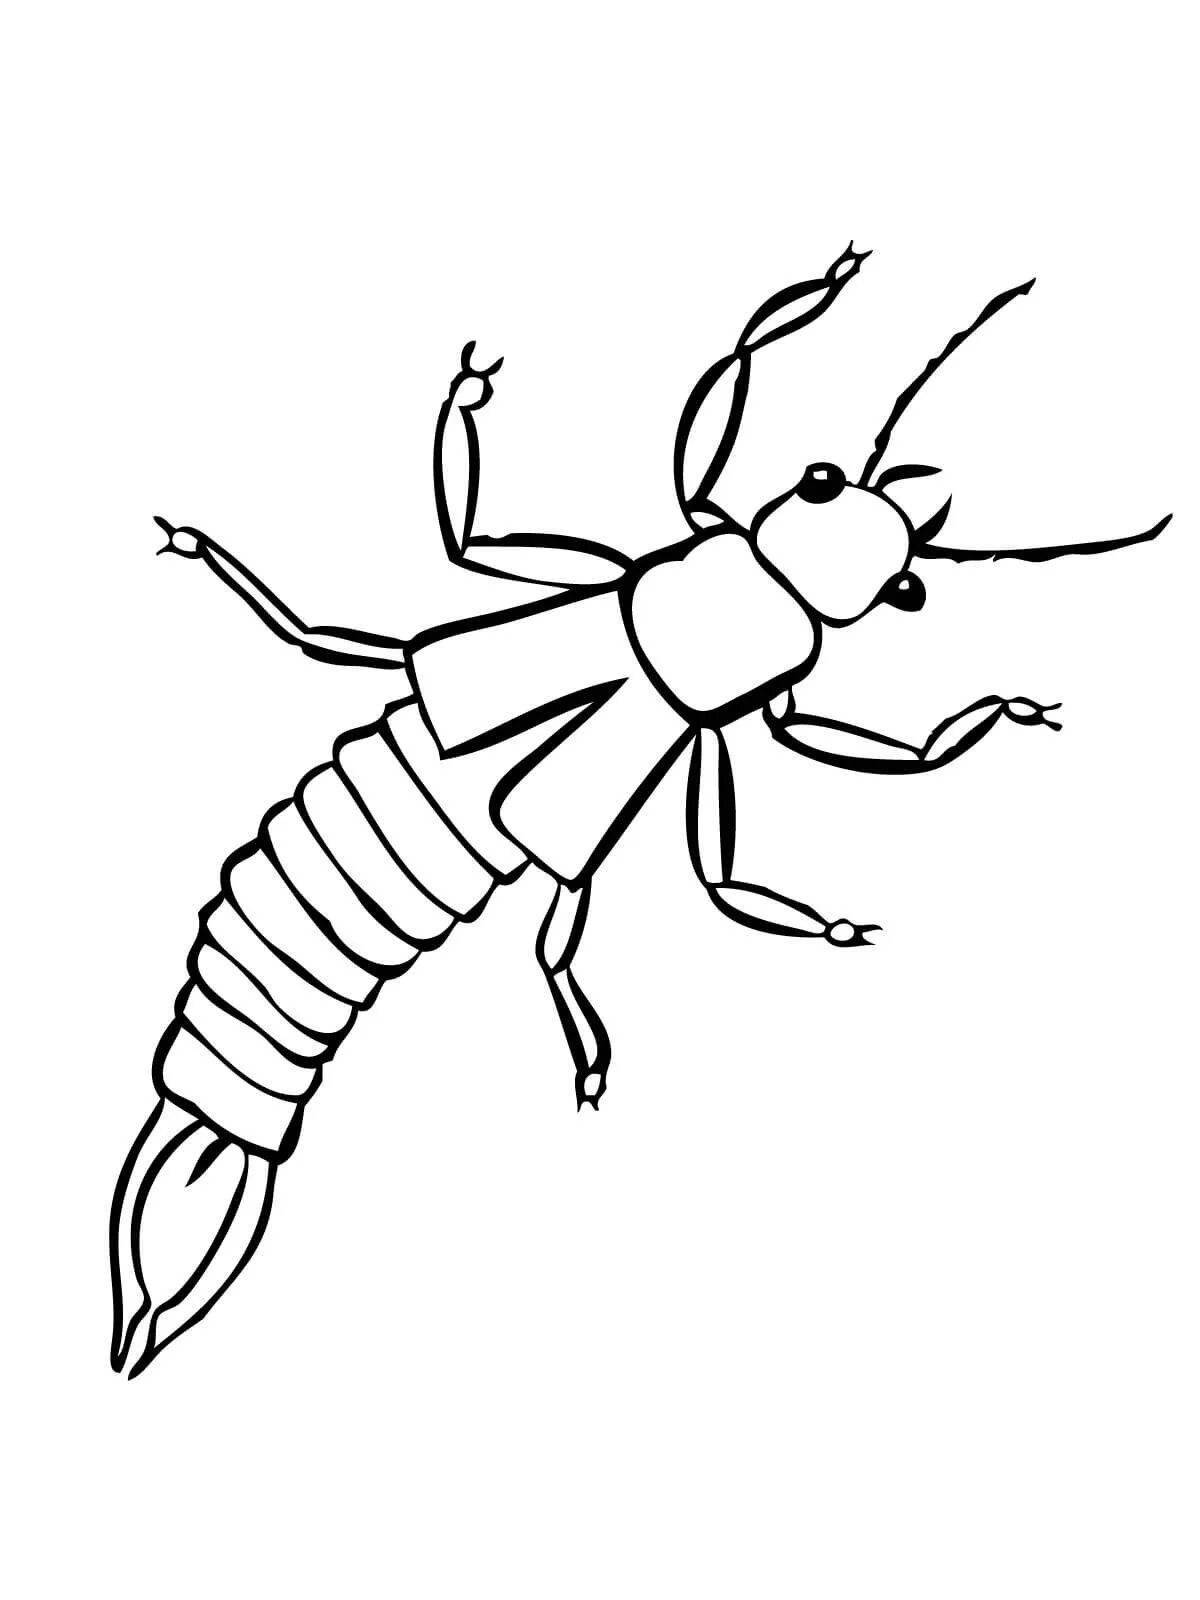 Amazing beetle coloring pages